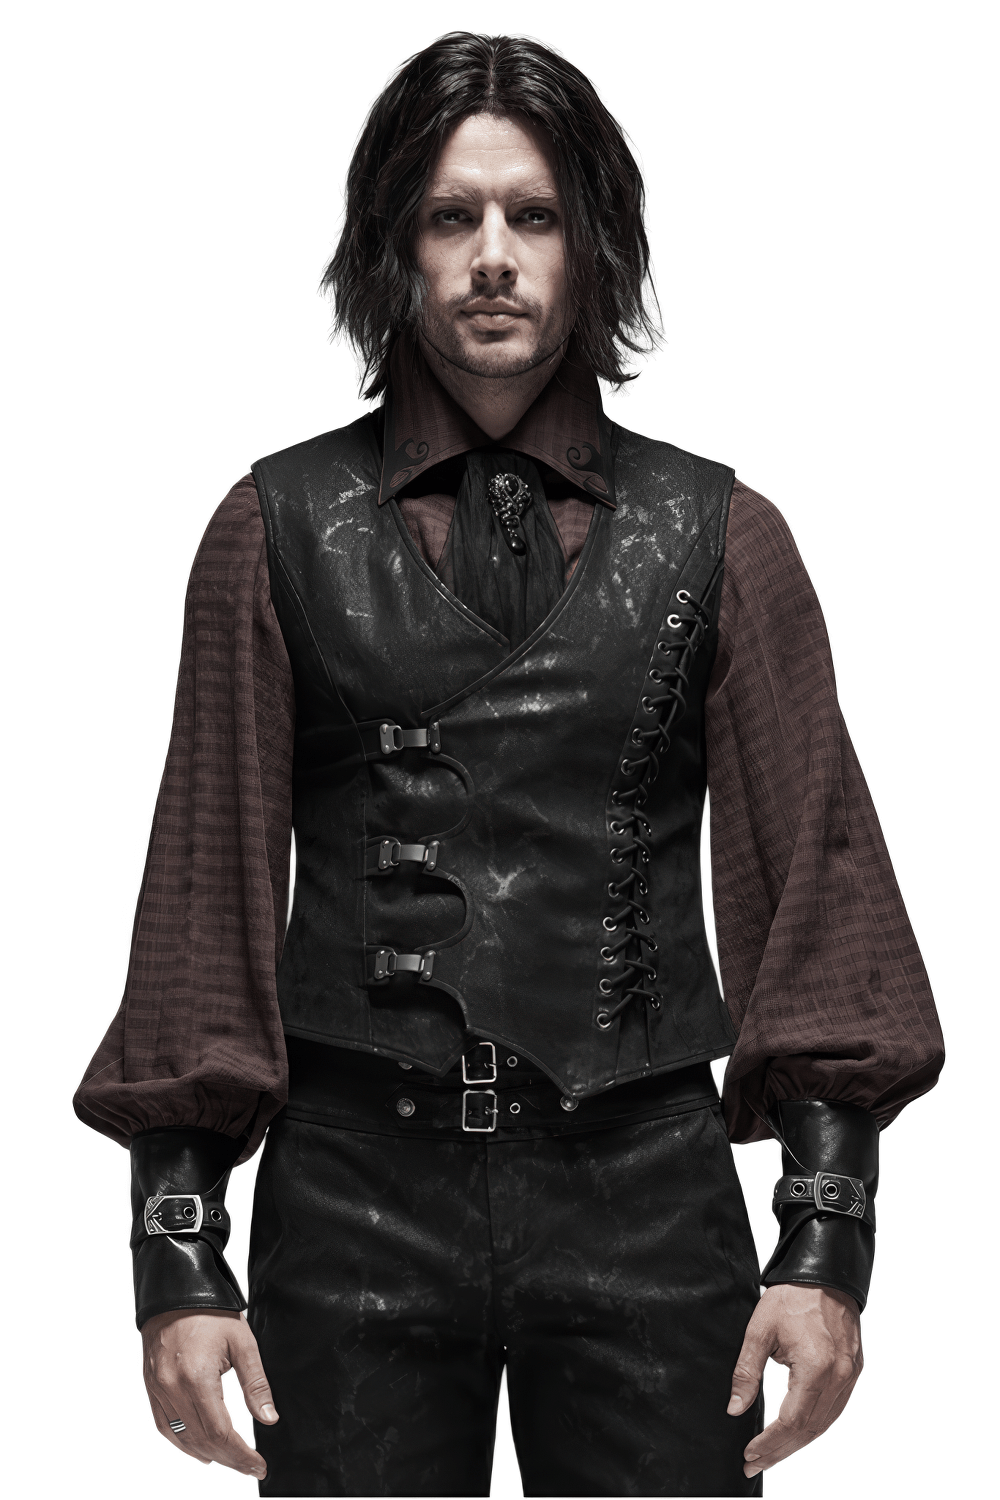 Gothic Style Men's Vest with Metal Buckles and Lacing